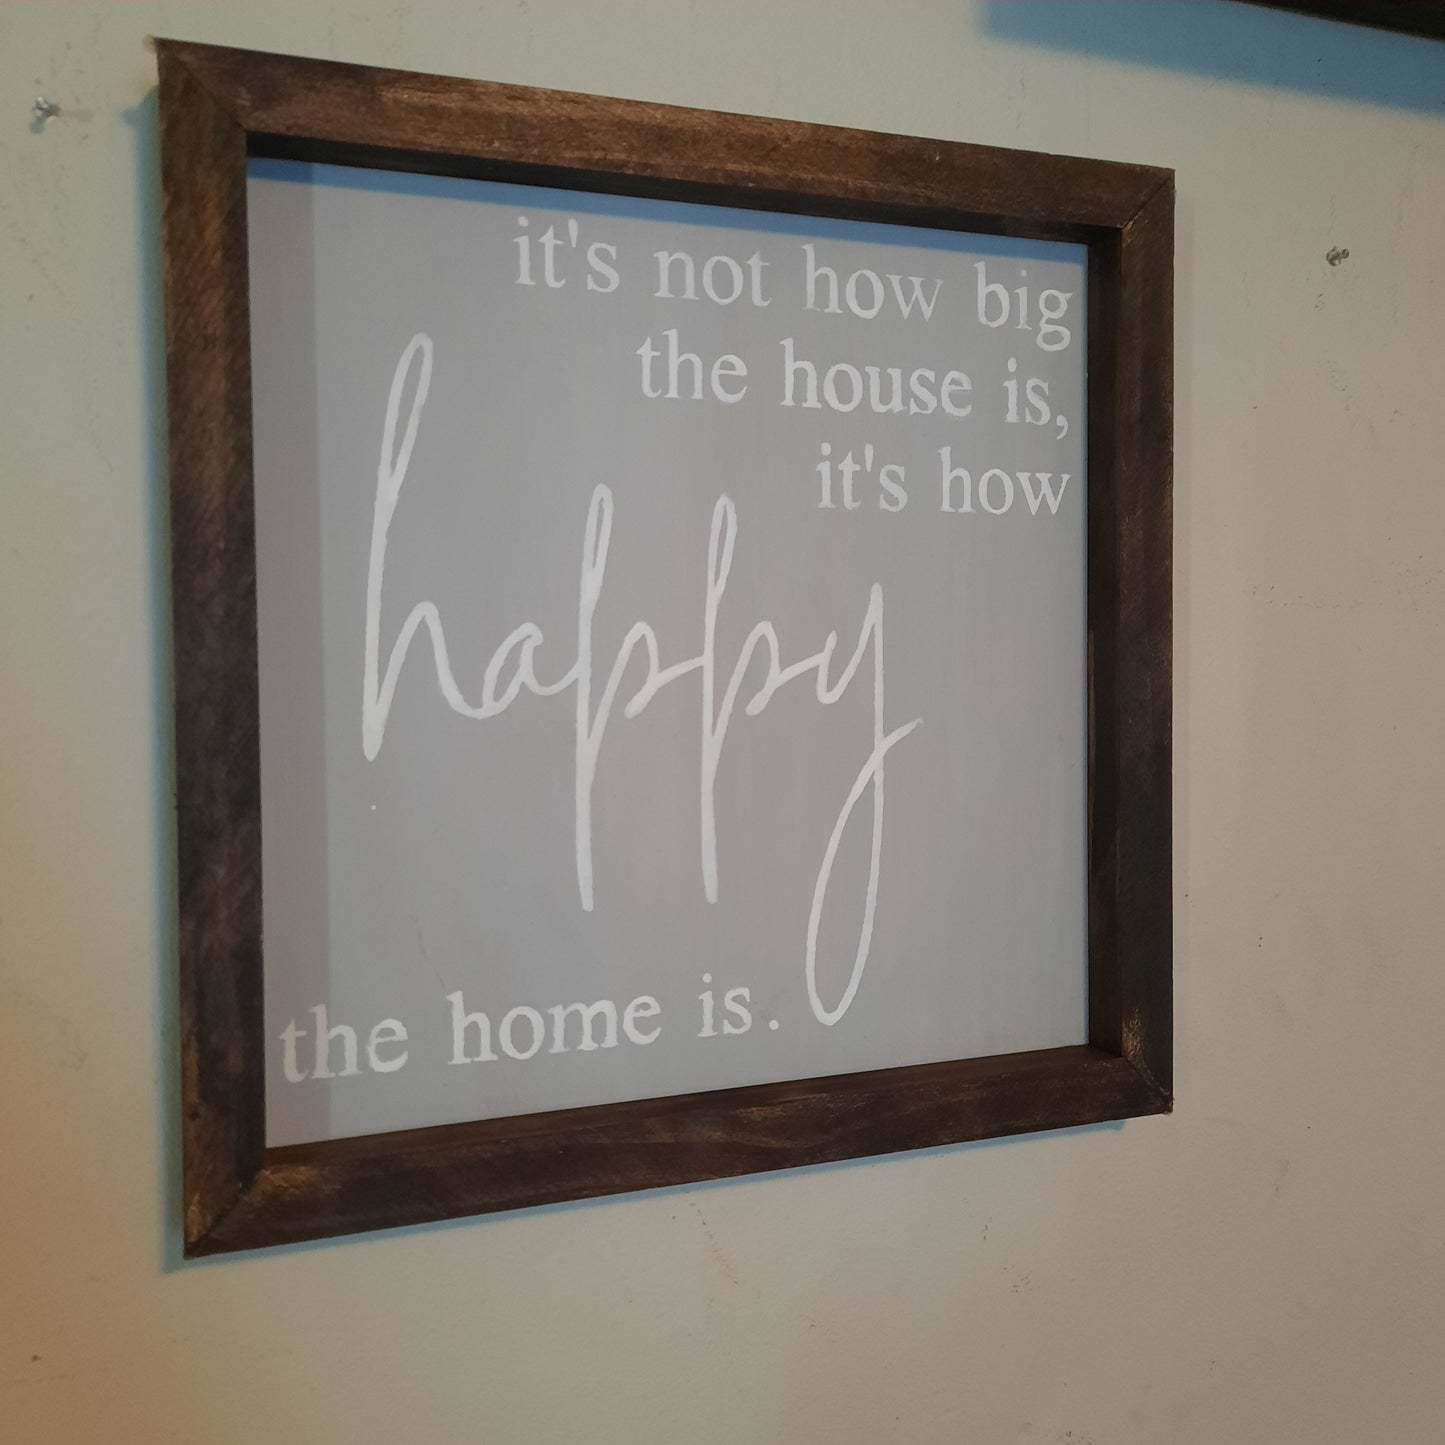 Its not how big the house is, its how happy the home is